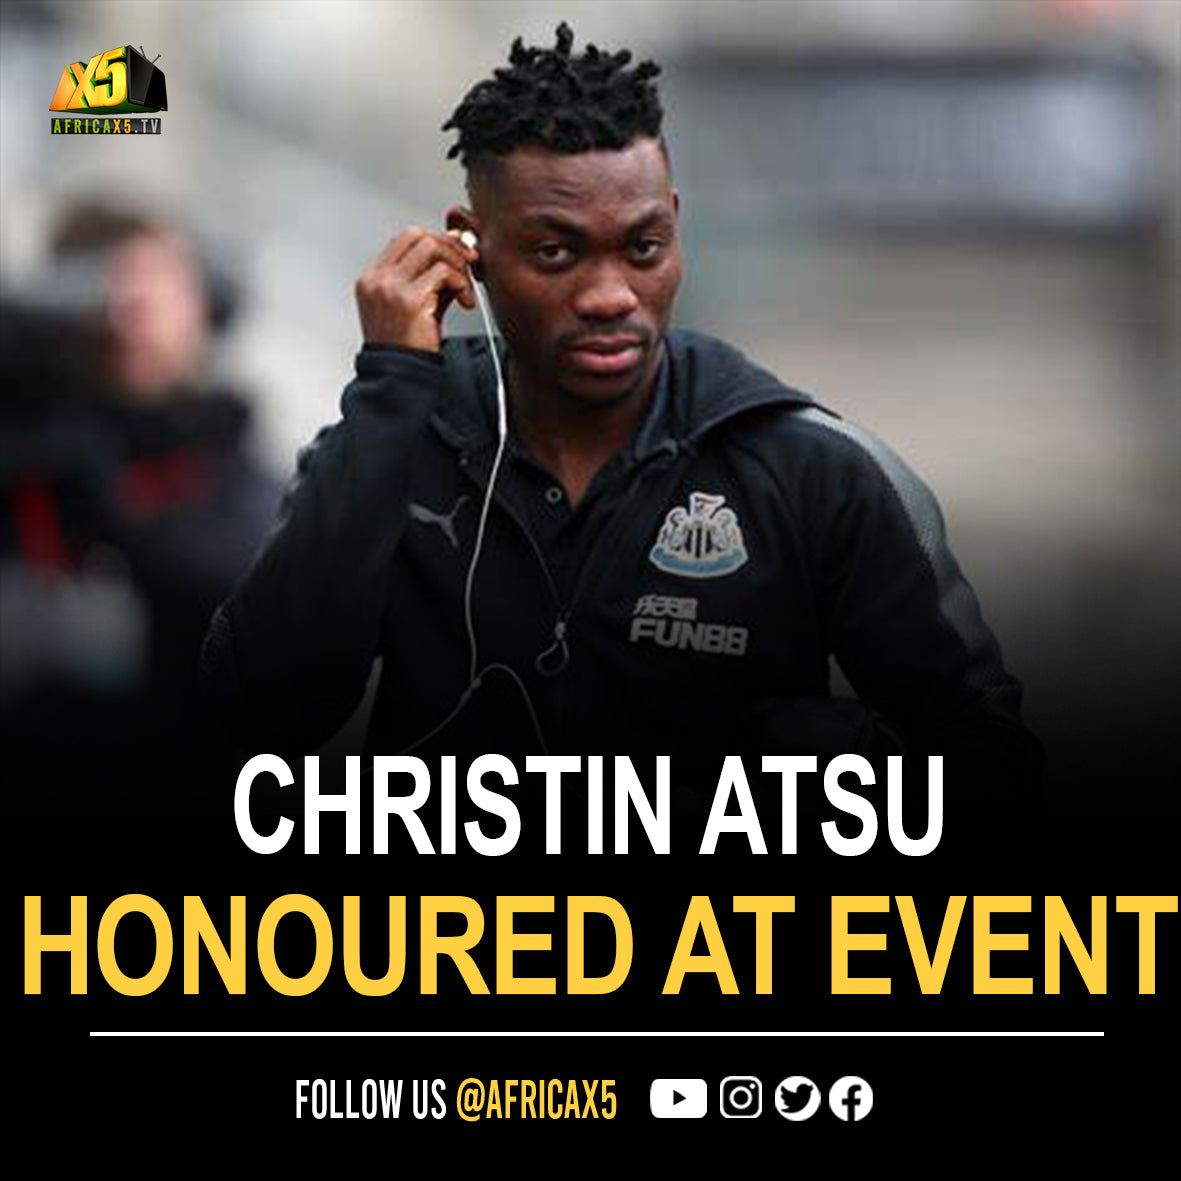 Late Christian Atsu honoured during traditional remembrance event